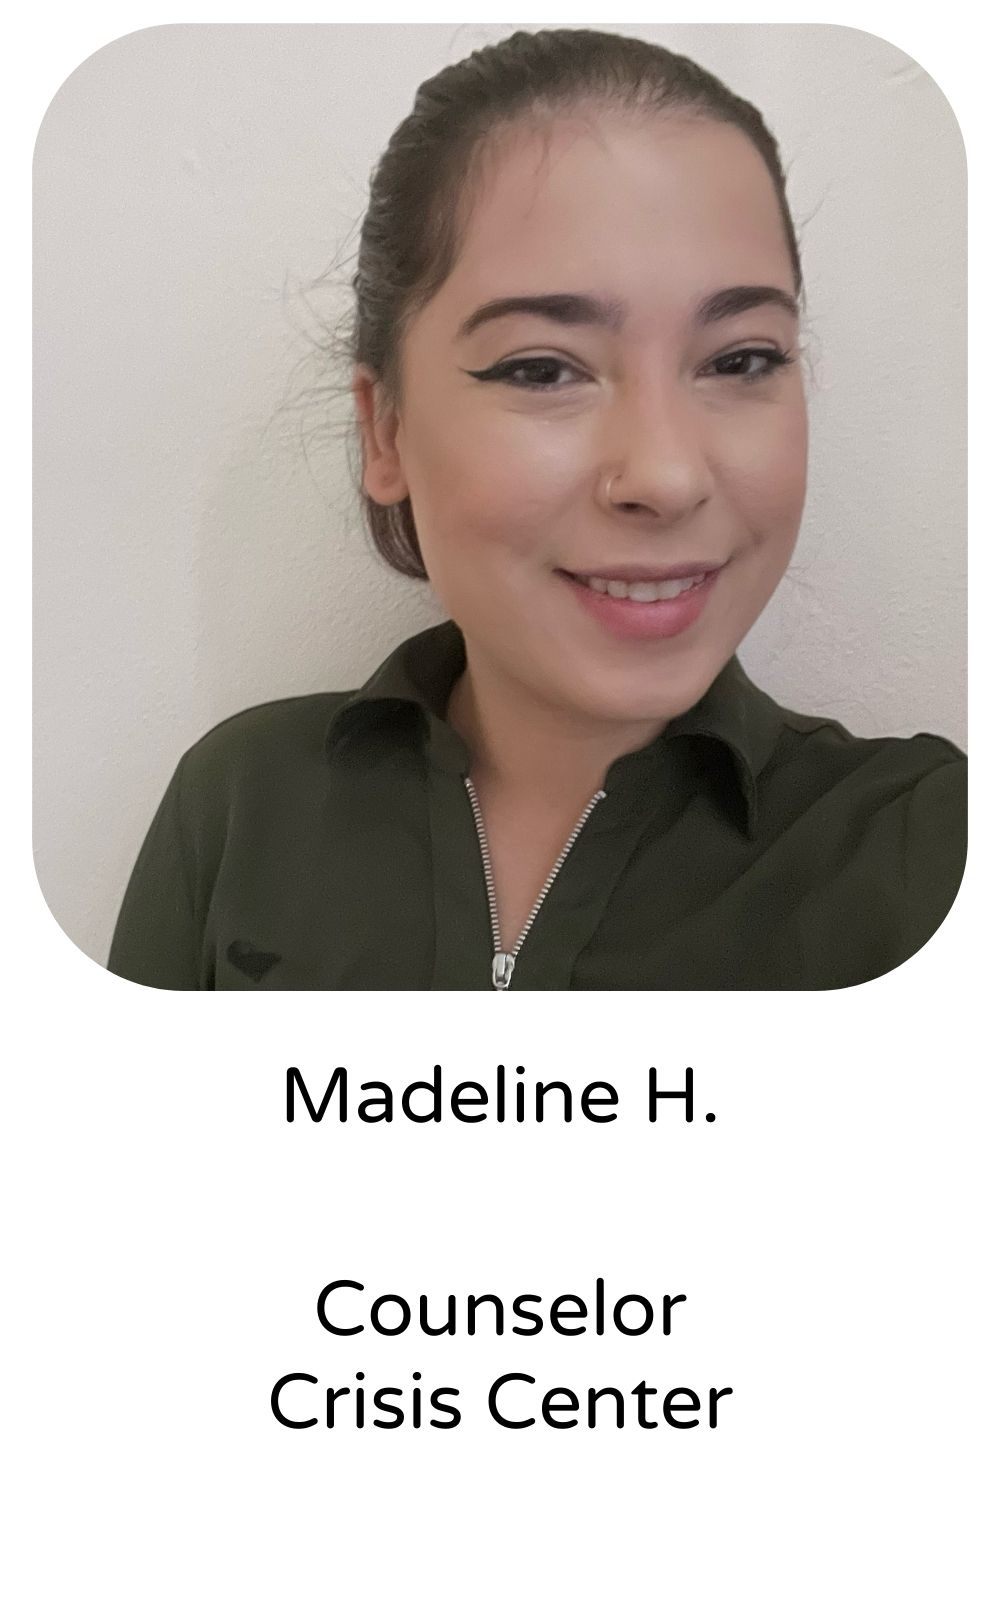 Madeline H, Counselor, Crisis Center